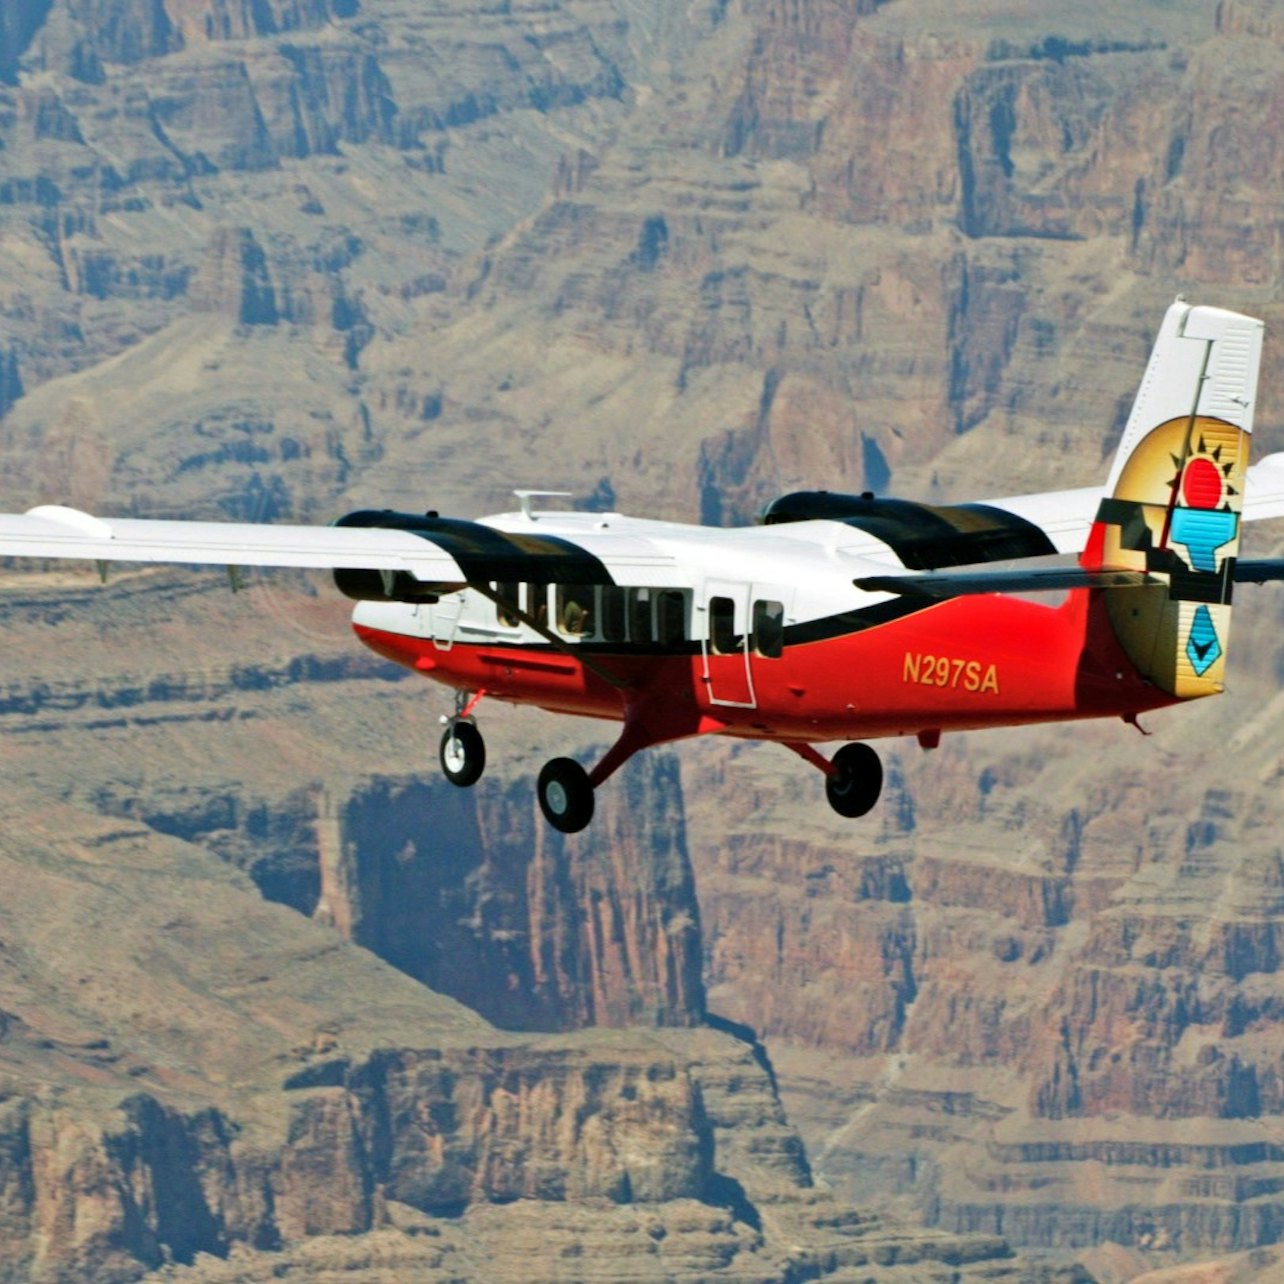 Grand Canyon Highlights: Roundtrip Flight from Las Vegas - Accommodations in Las Vegas